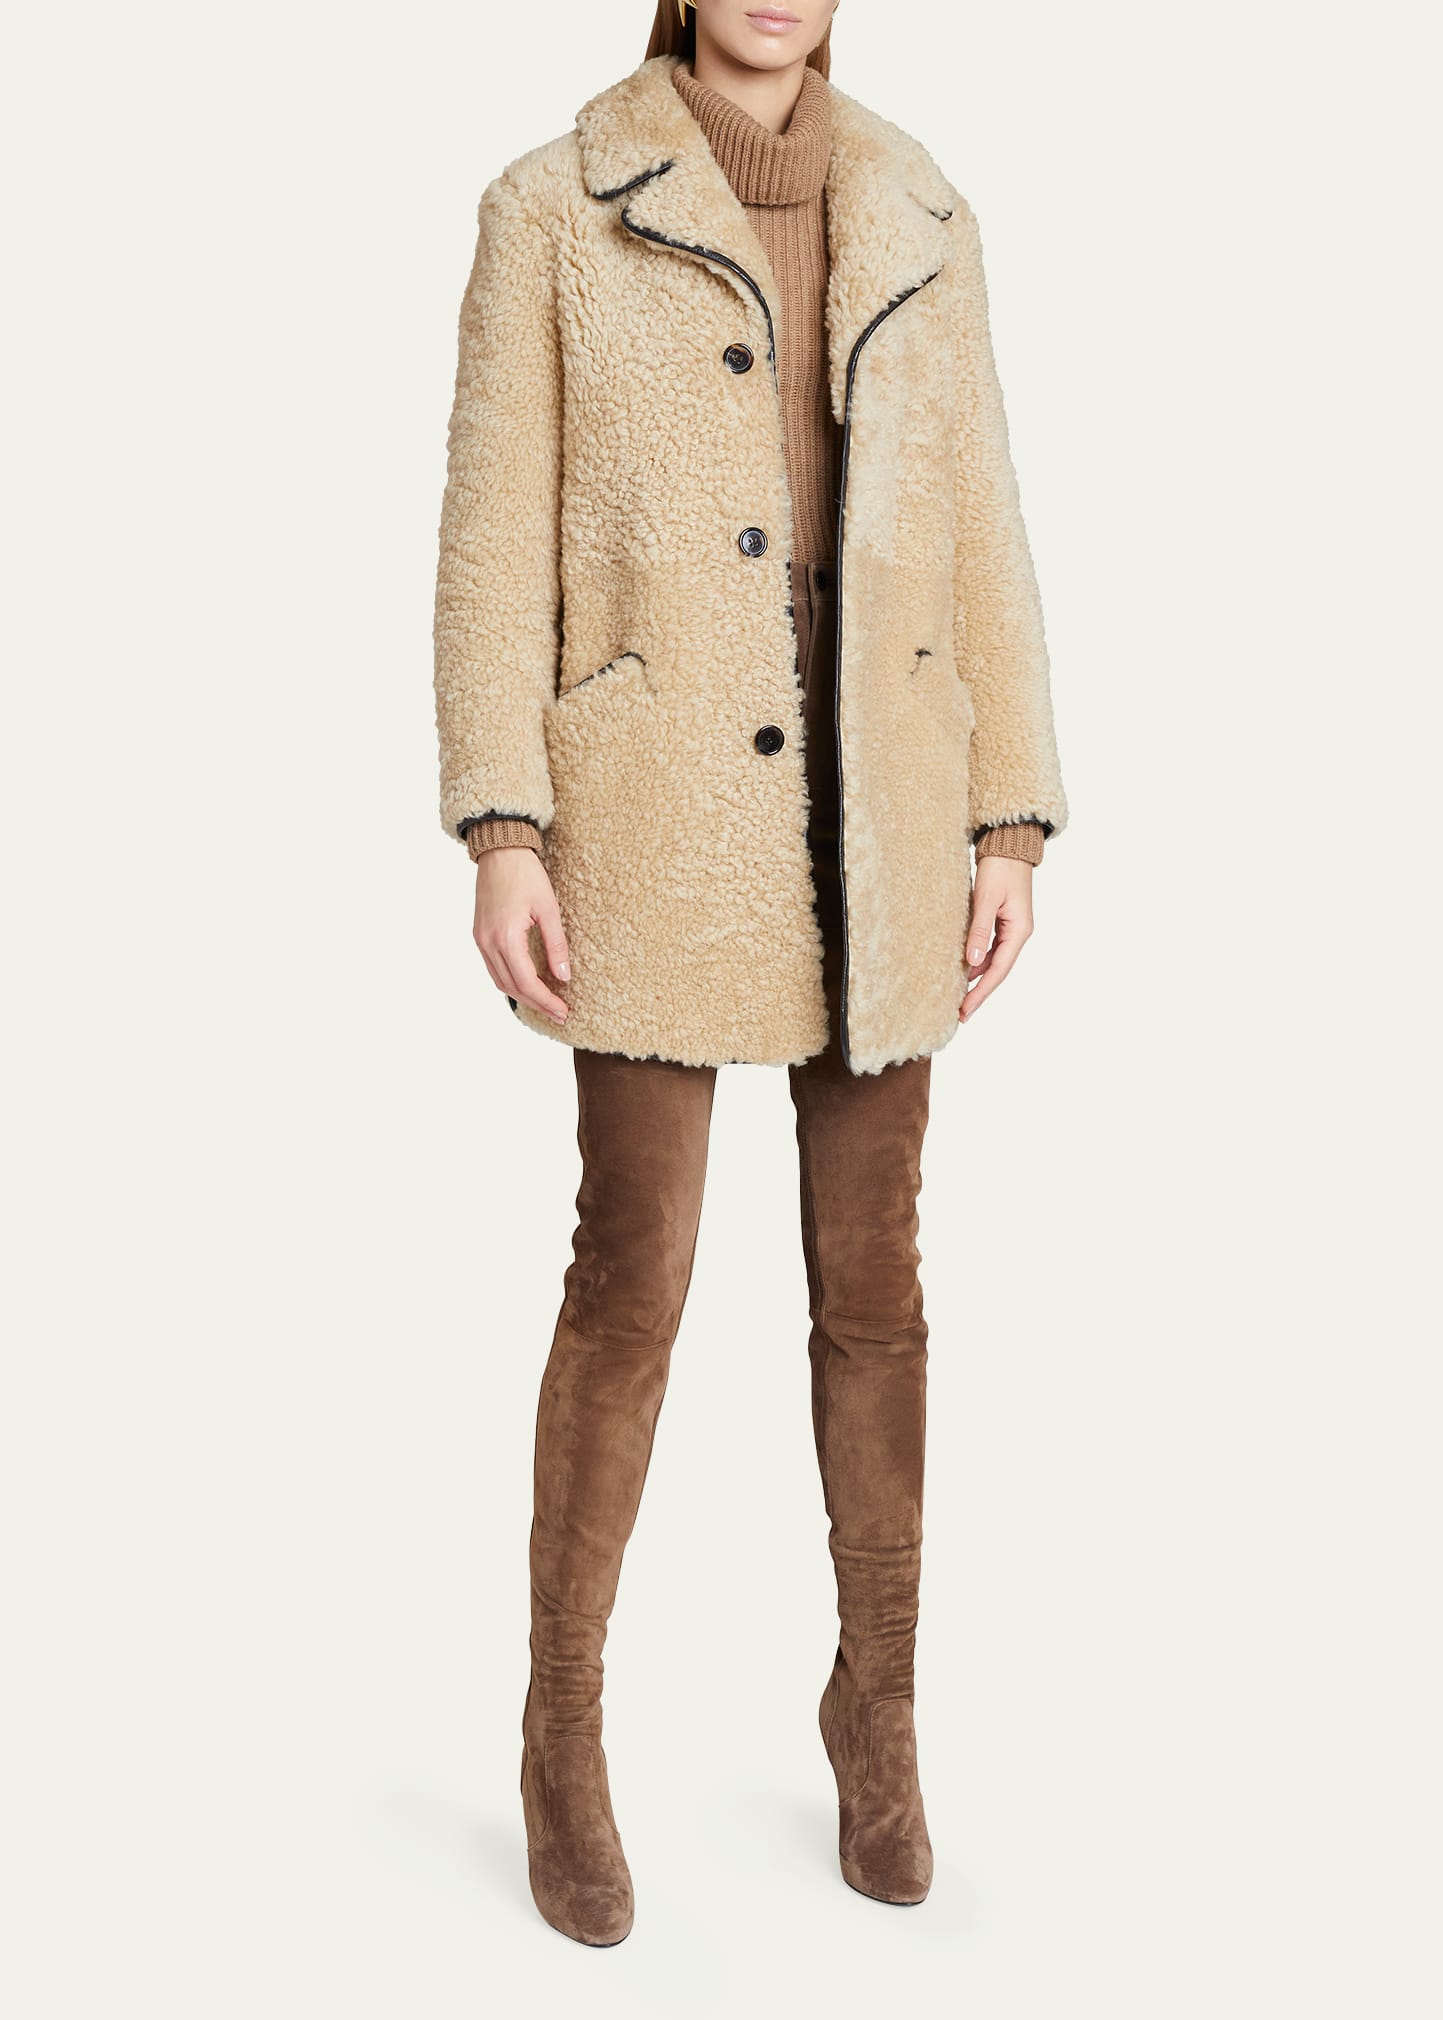 Shearling 3-Button Coat w/ Leather Trim